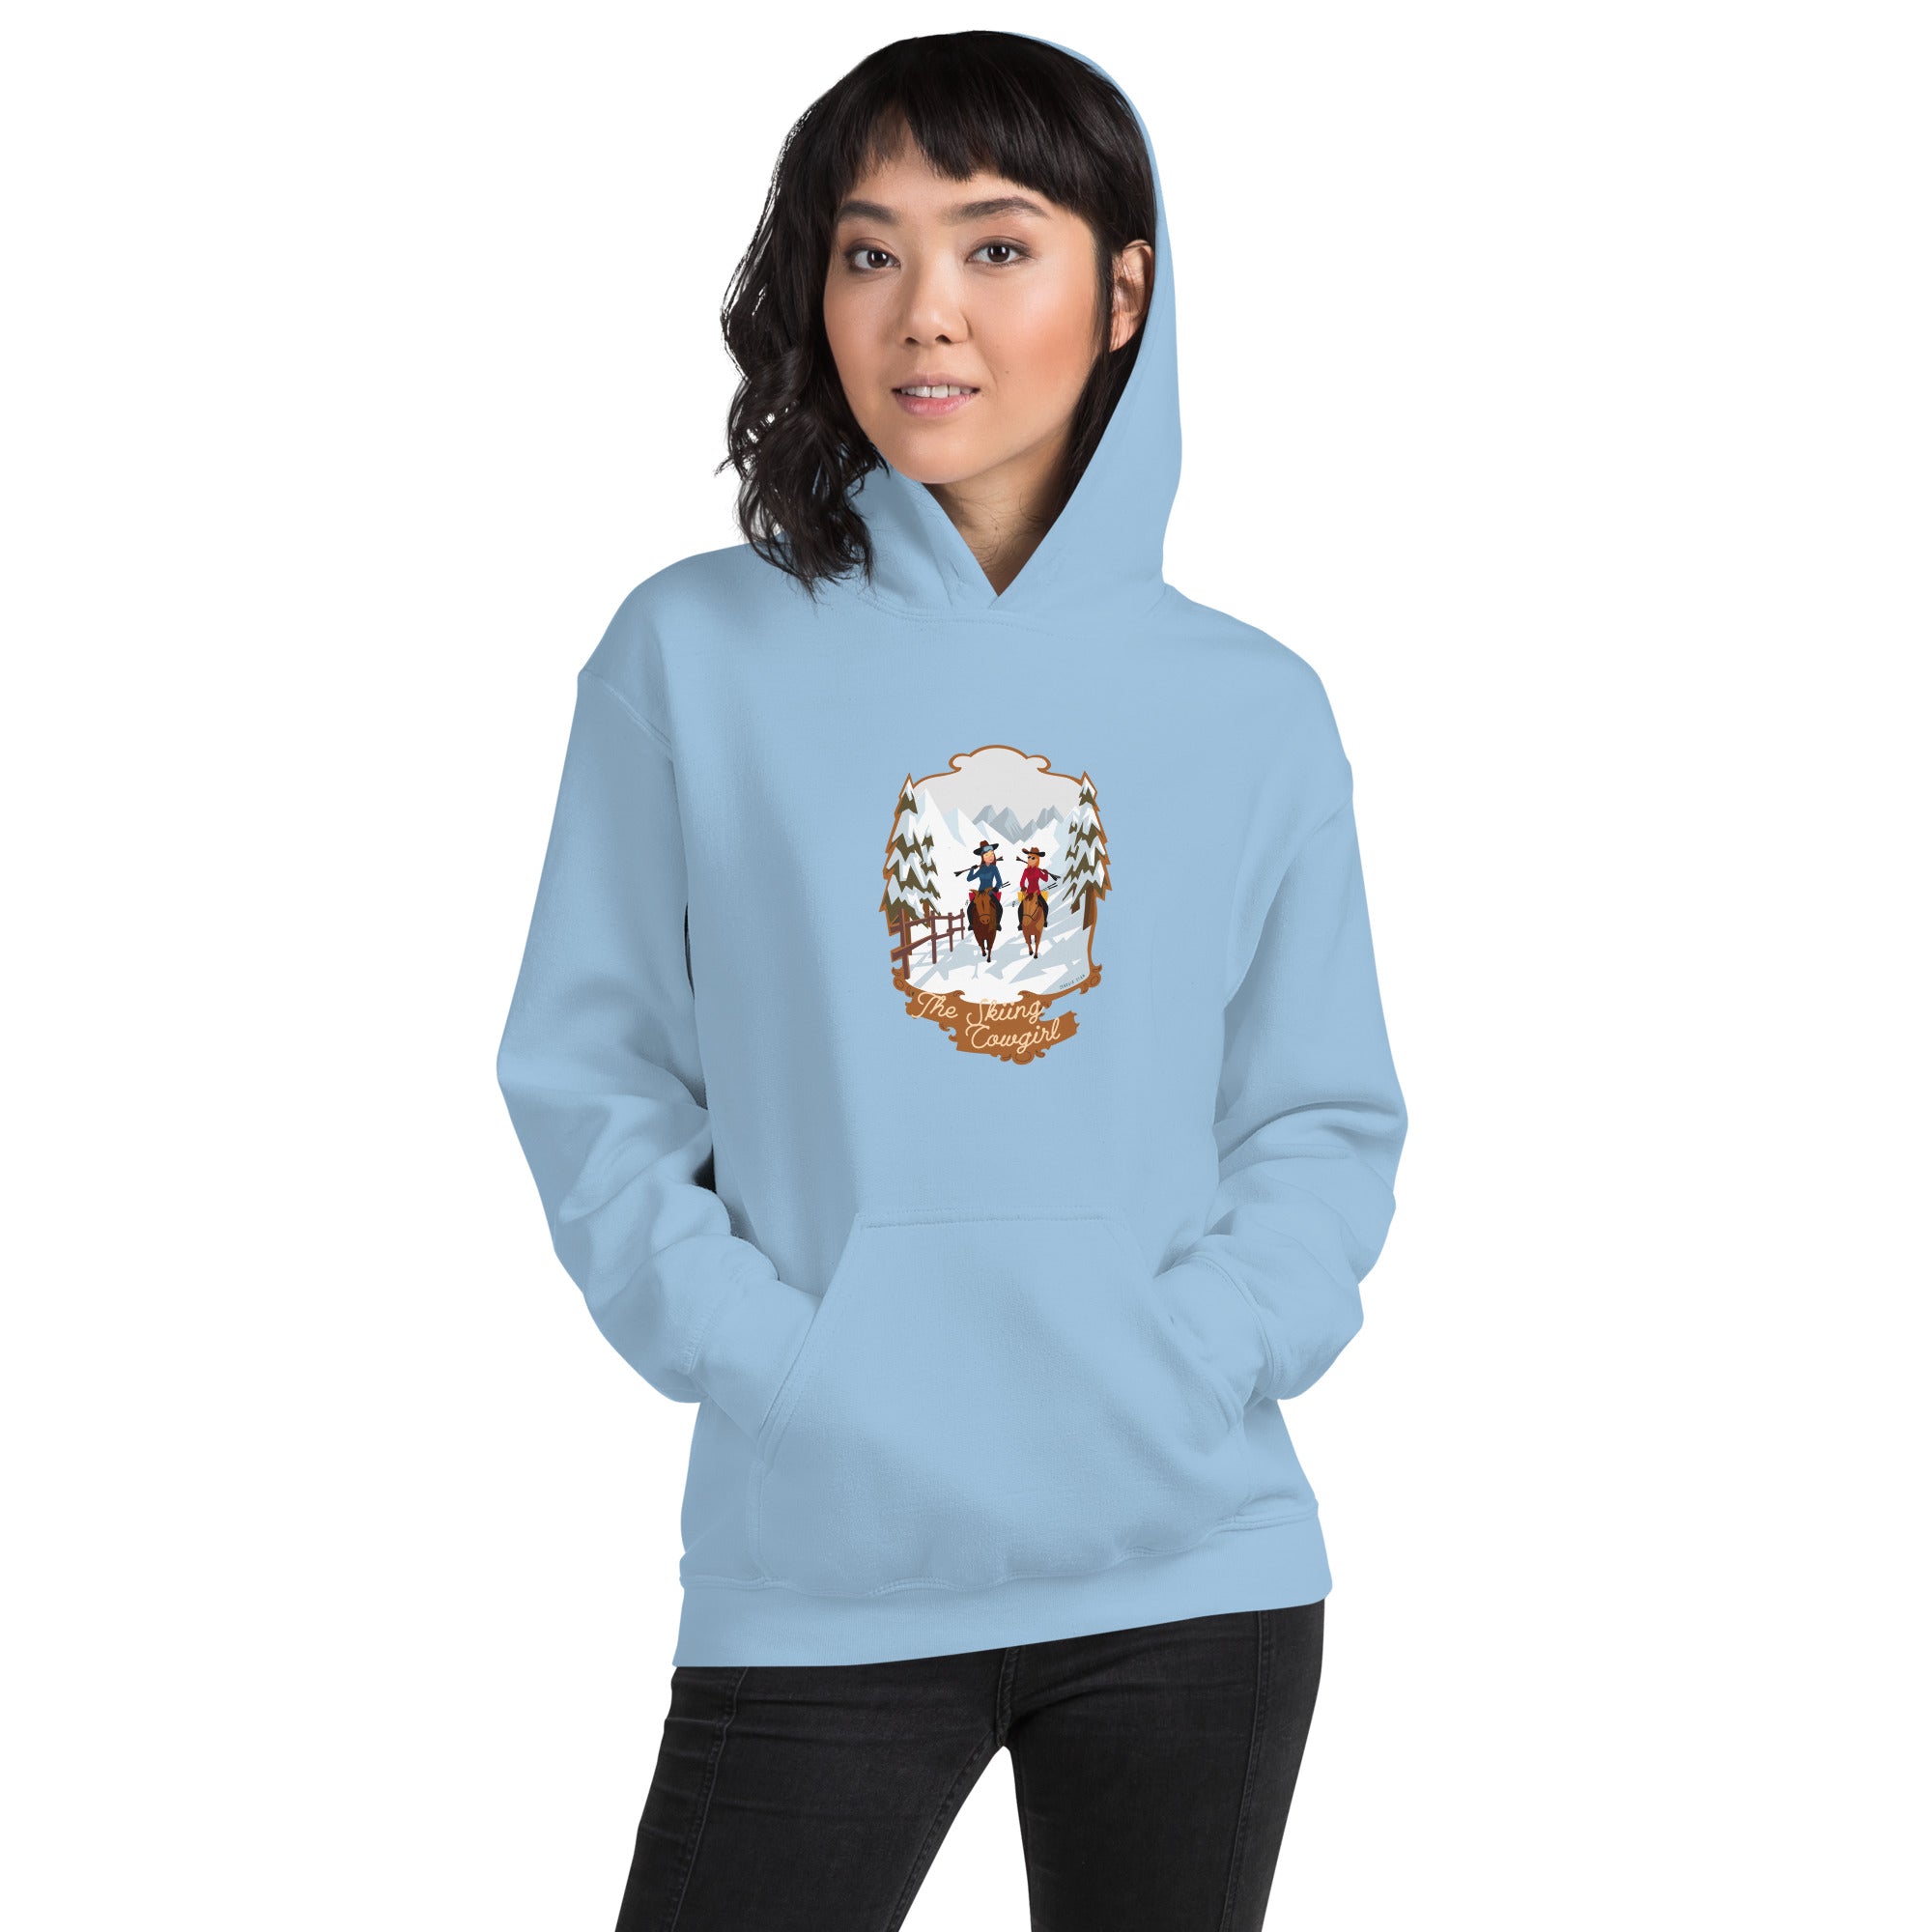 Unisex Hoodie The Skiing Cowgirl on light colors